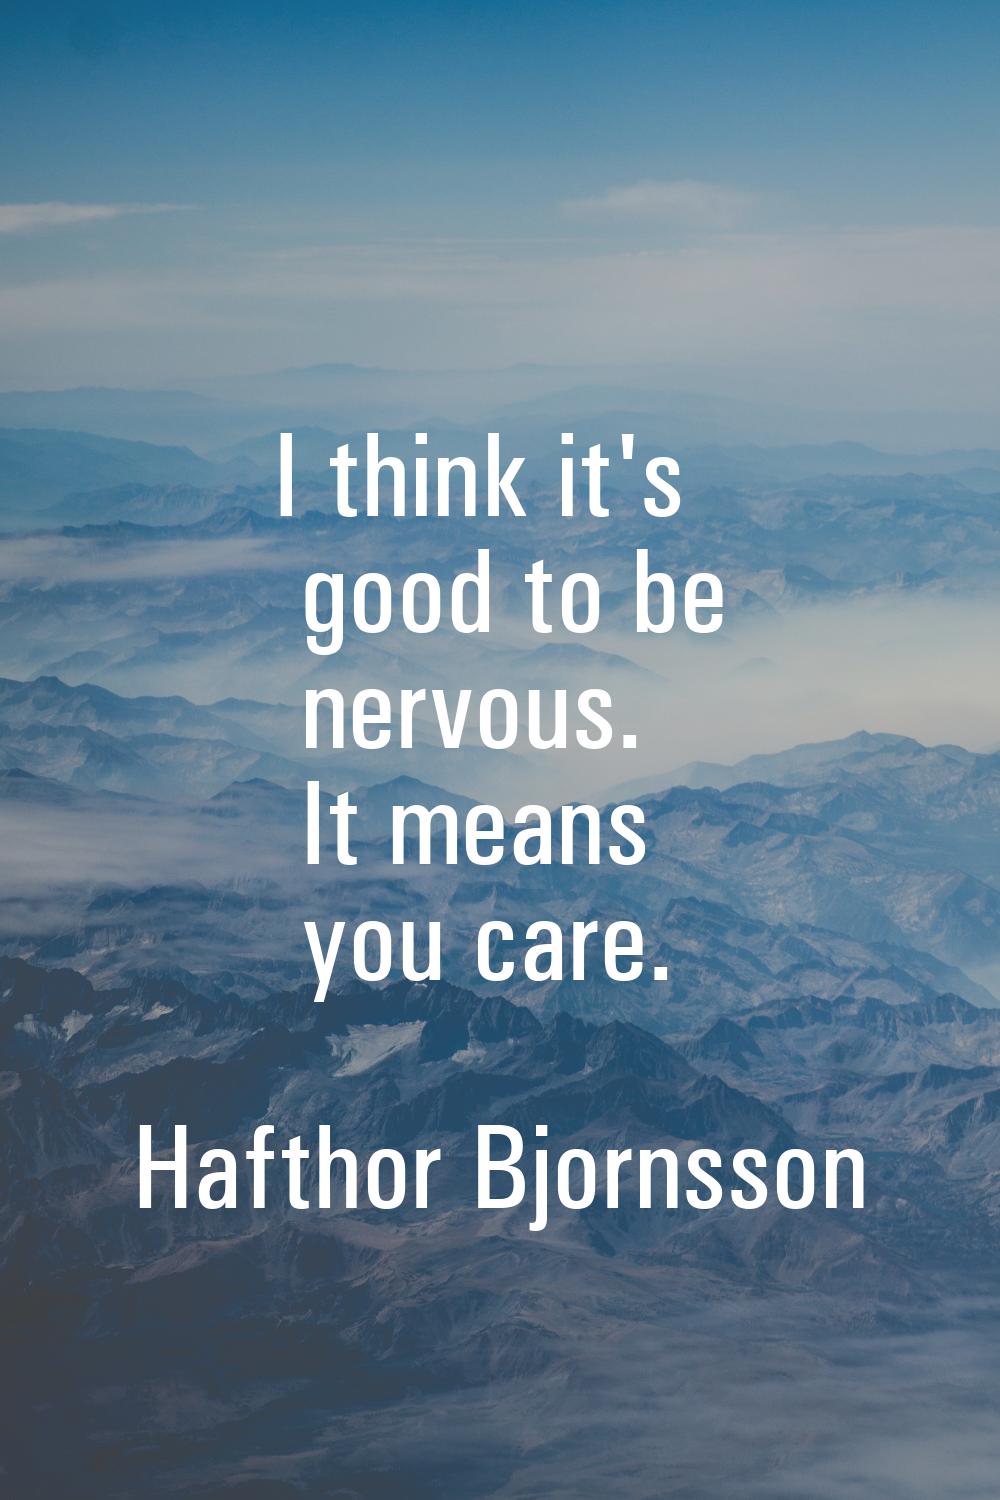 I think it's good to be nervous. It means you care.